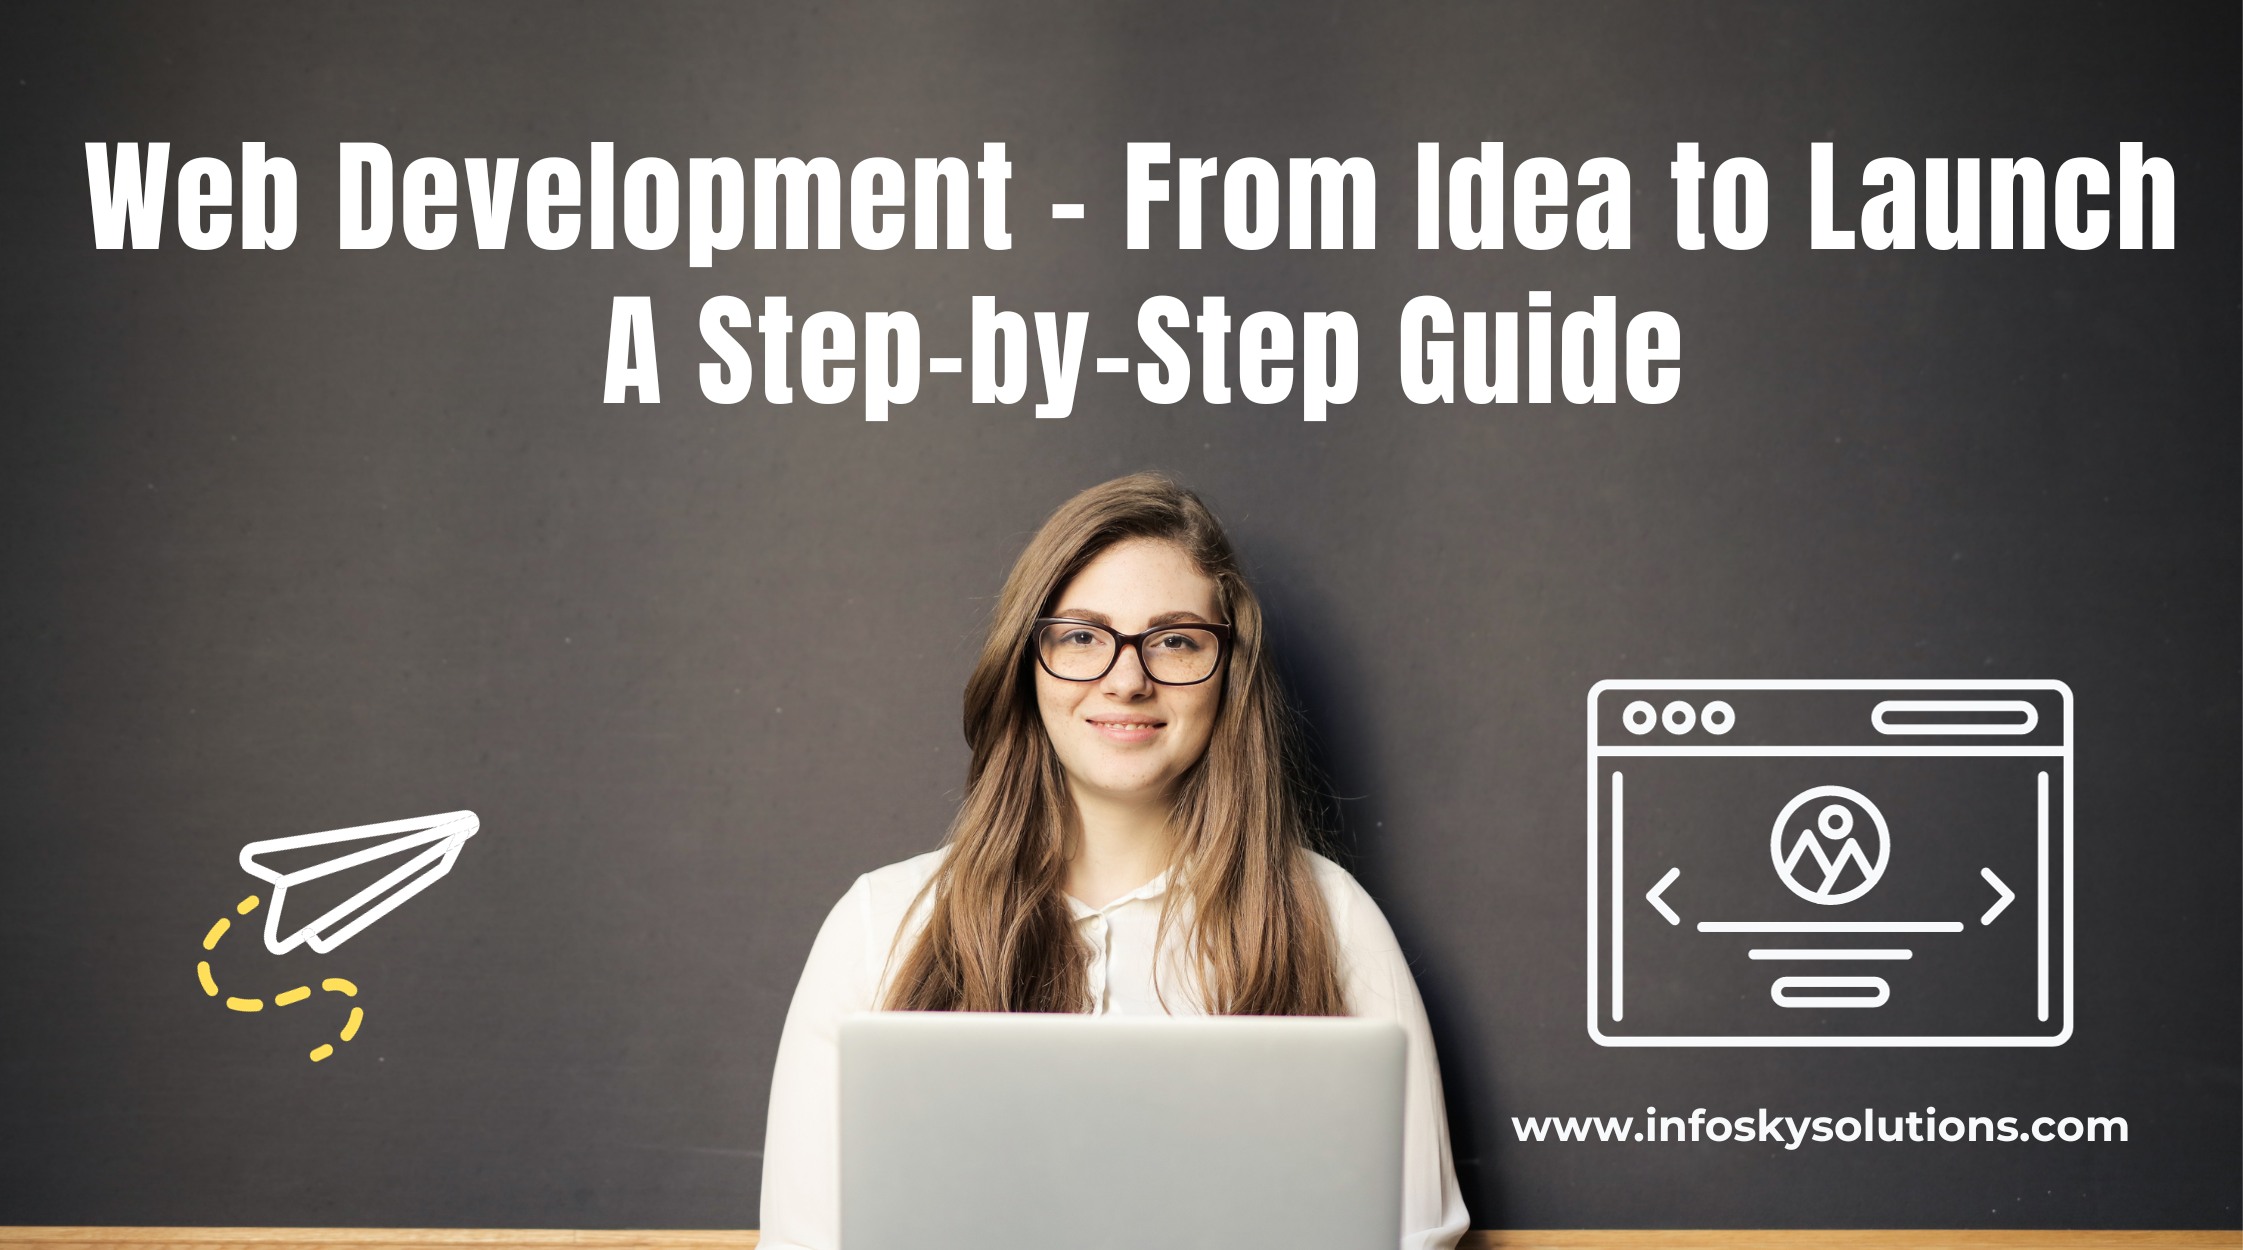 Web Development - From Idea to Launch, A Step-by-Step Guide from Infosky Solutions